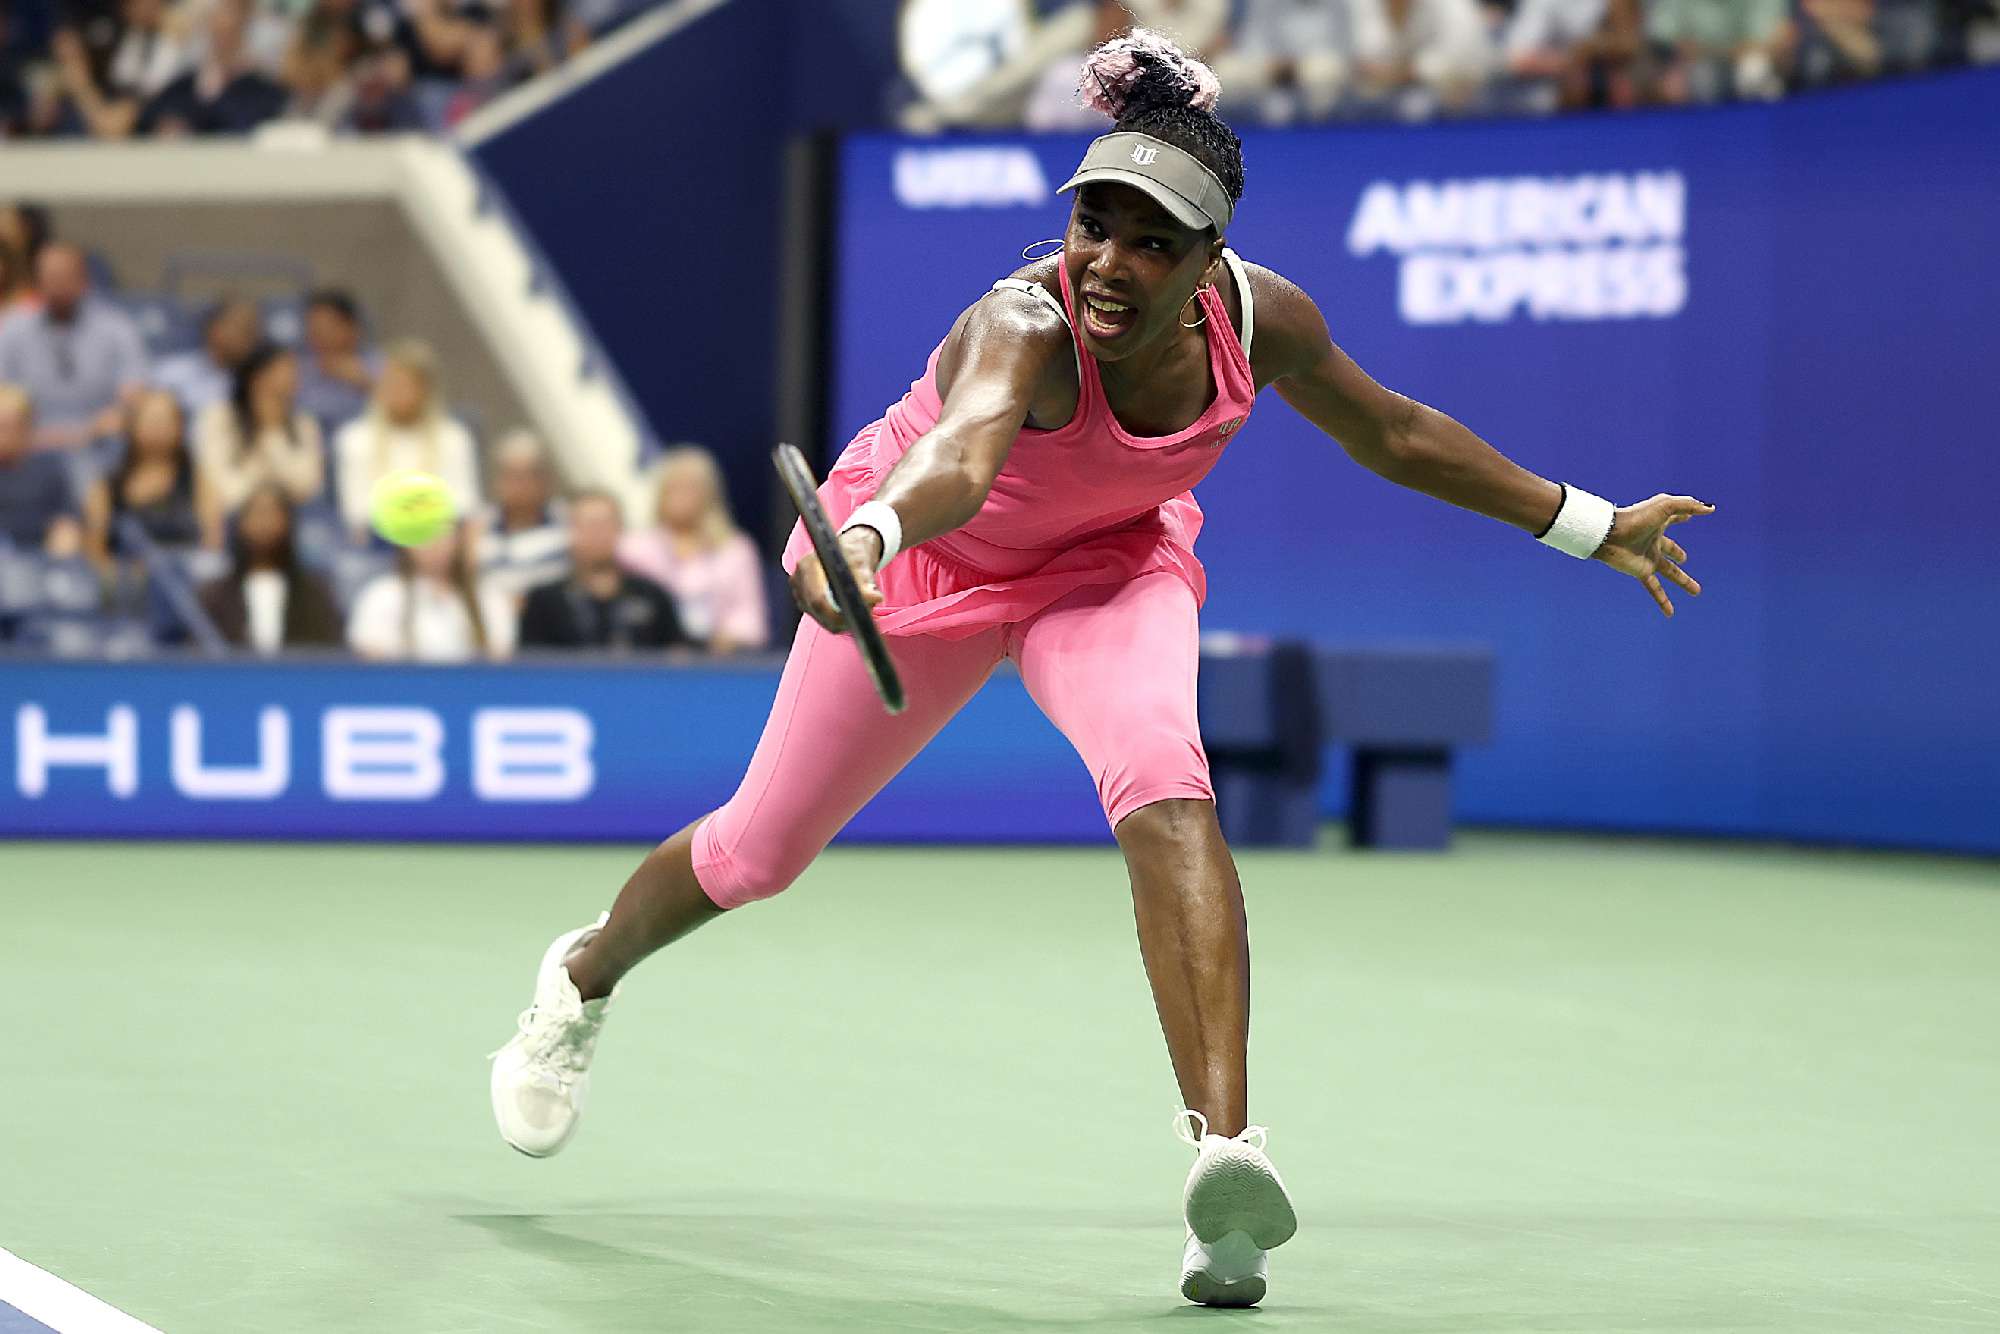 Venus Williams of the United States returns a shot against Greet Minnen of Belgium during their Women's Singles First Round match on Day Two of the 2023 US Open